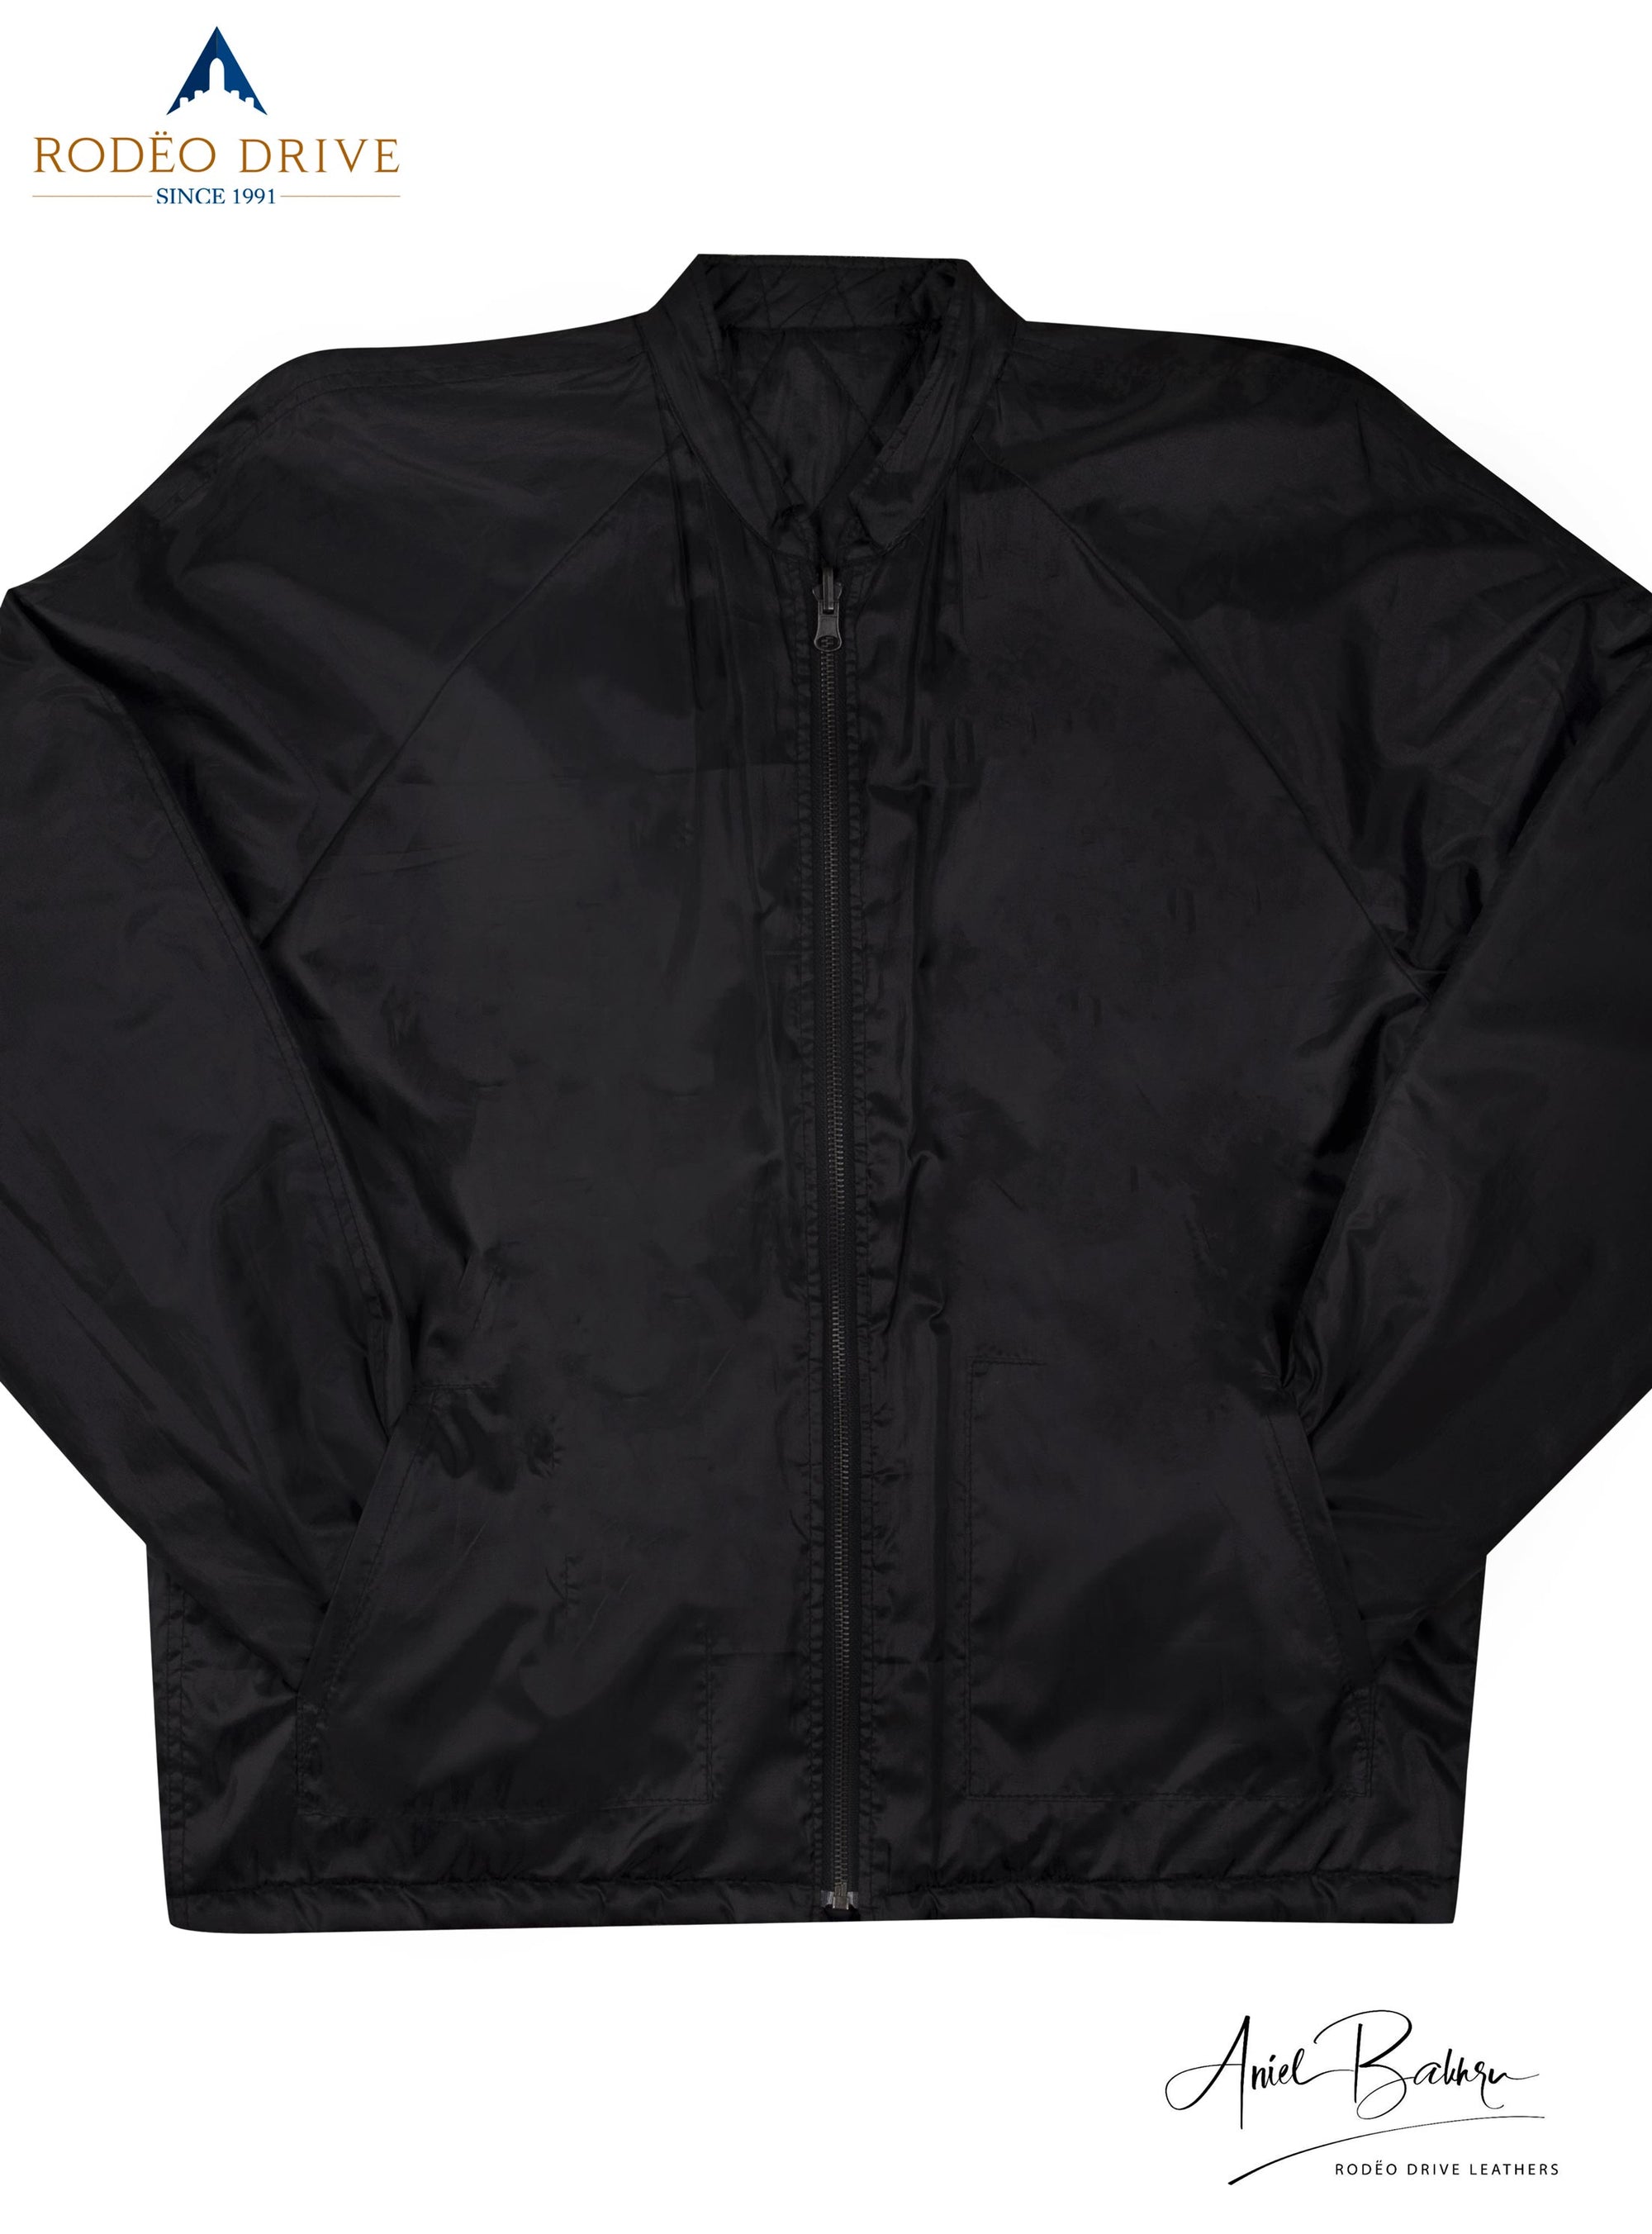 Front image of full black jacket. it is zipped. Its hands are tucked in side slit pockets